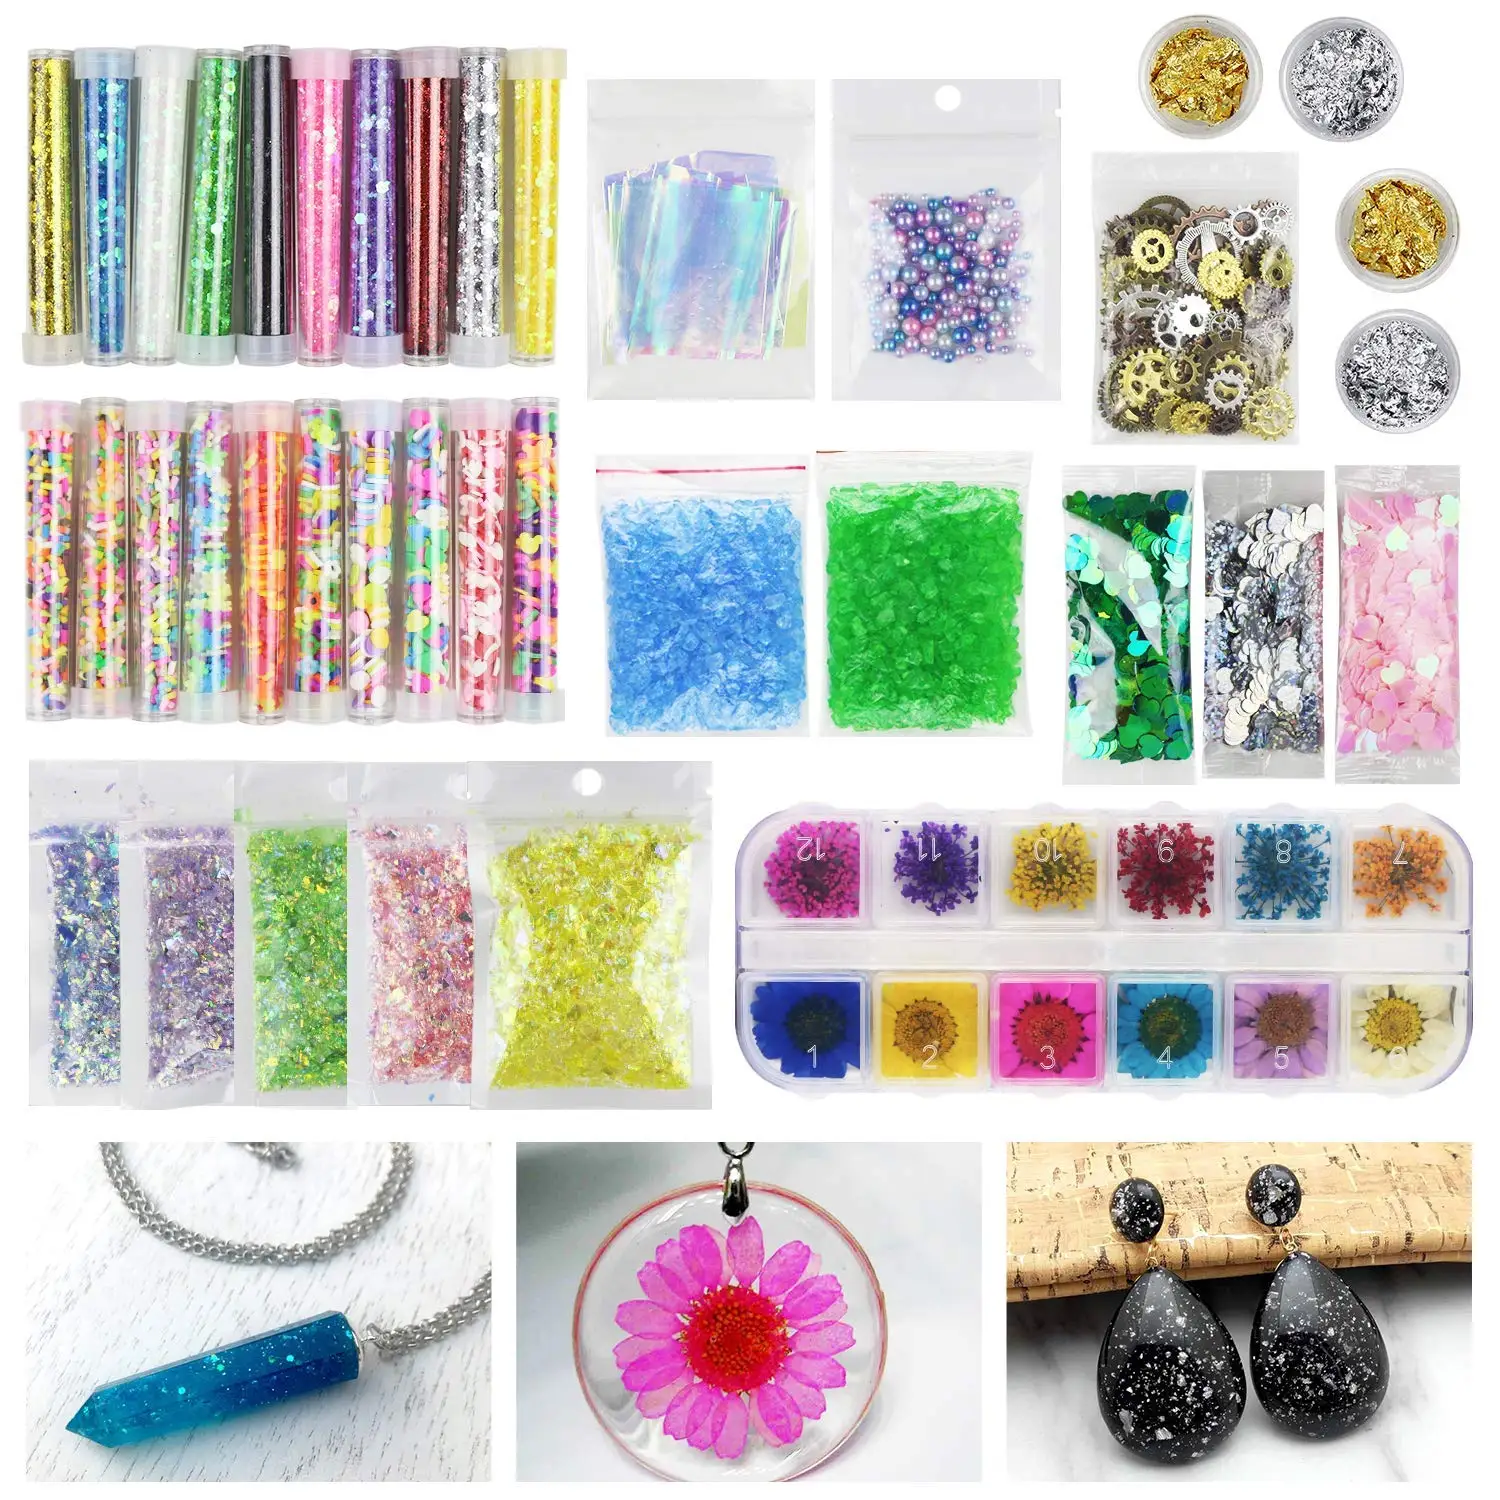 Cheap Resin Craft Kit, find Resin Craft Kit deals on line at Alibaba.com